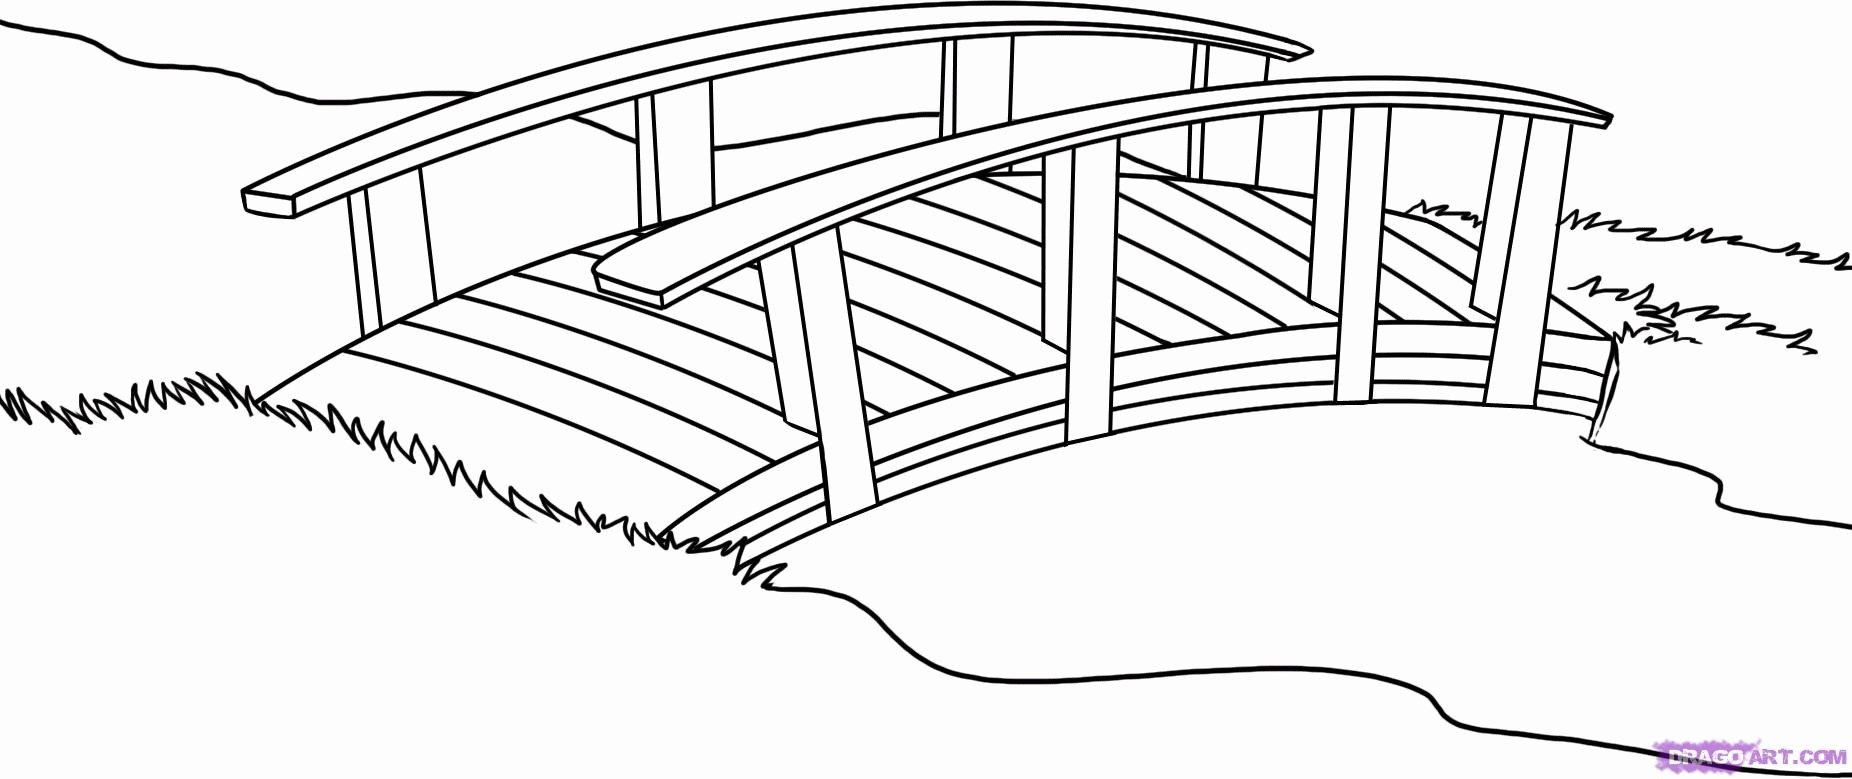 12 Pics of Troll Under Bridge Coloring Page - Three Billy Goats ...